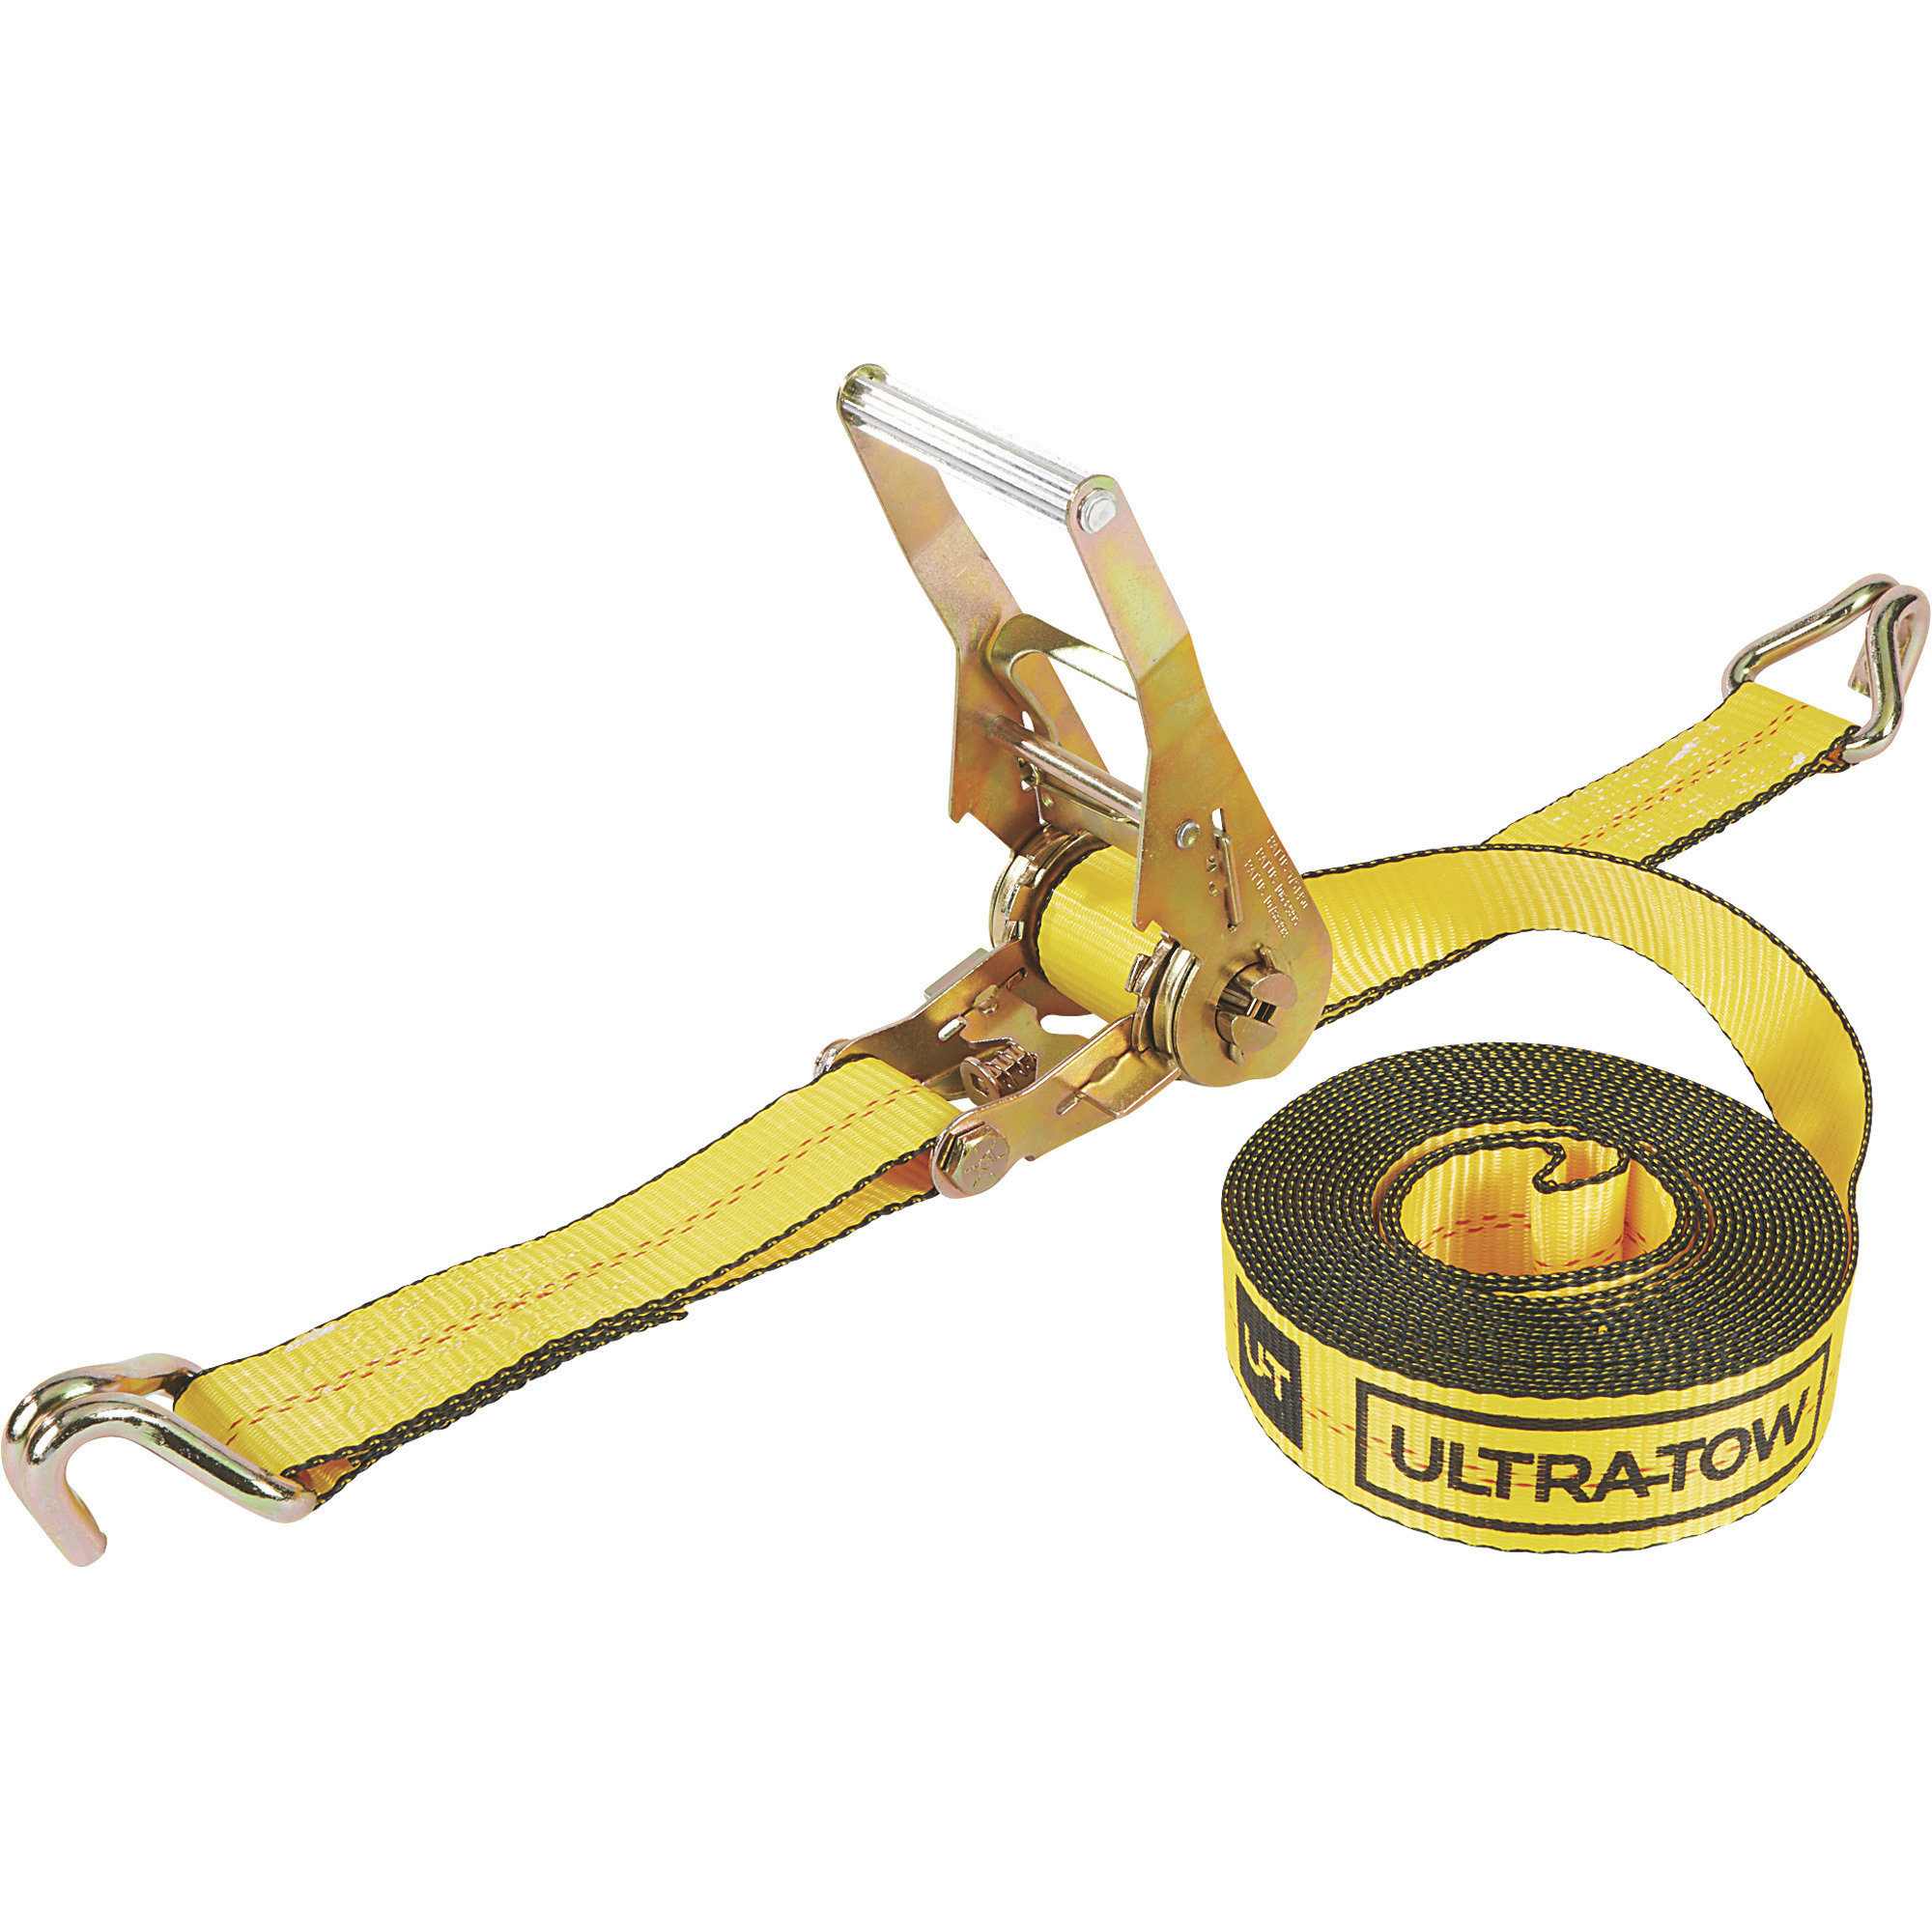 Ultra-Tow 2Inch x 27ft. AST Ratchet Strap with J-Hooks, 10,000-Lb. Breaking Strength, 3,300-Lb. Working Load, Yellow, Model A815051